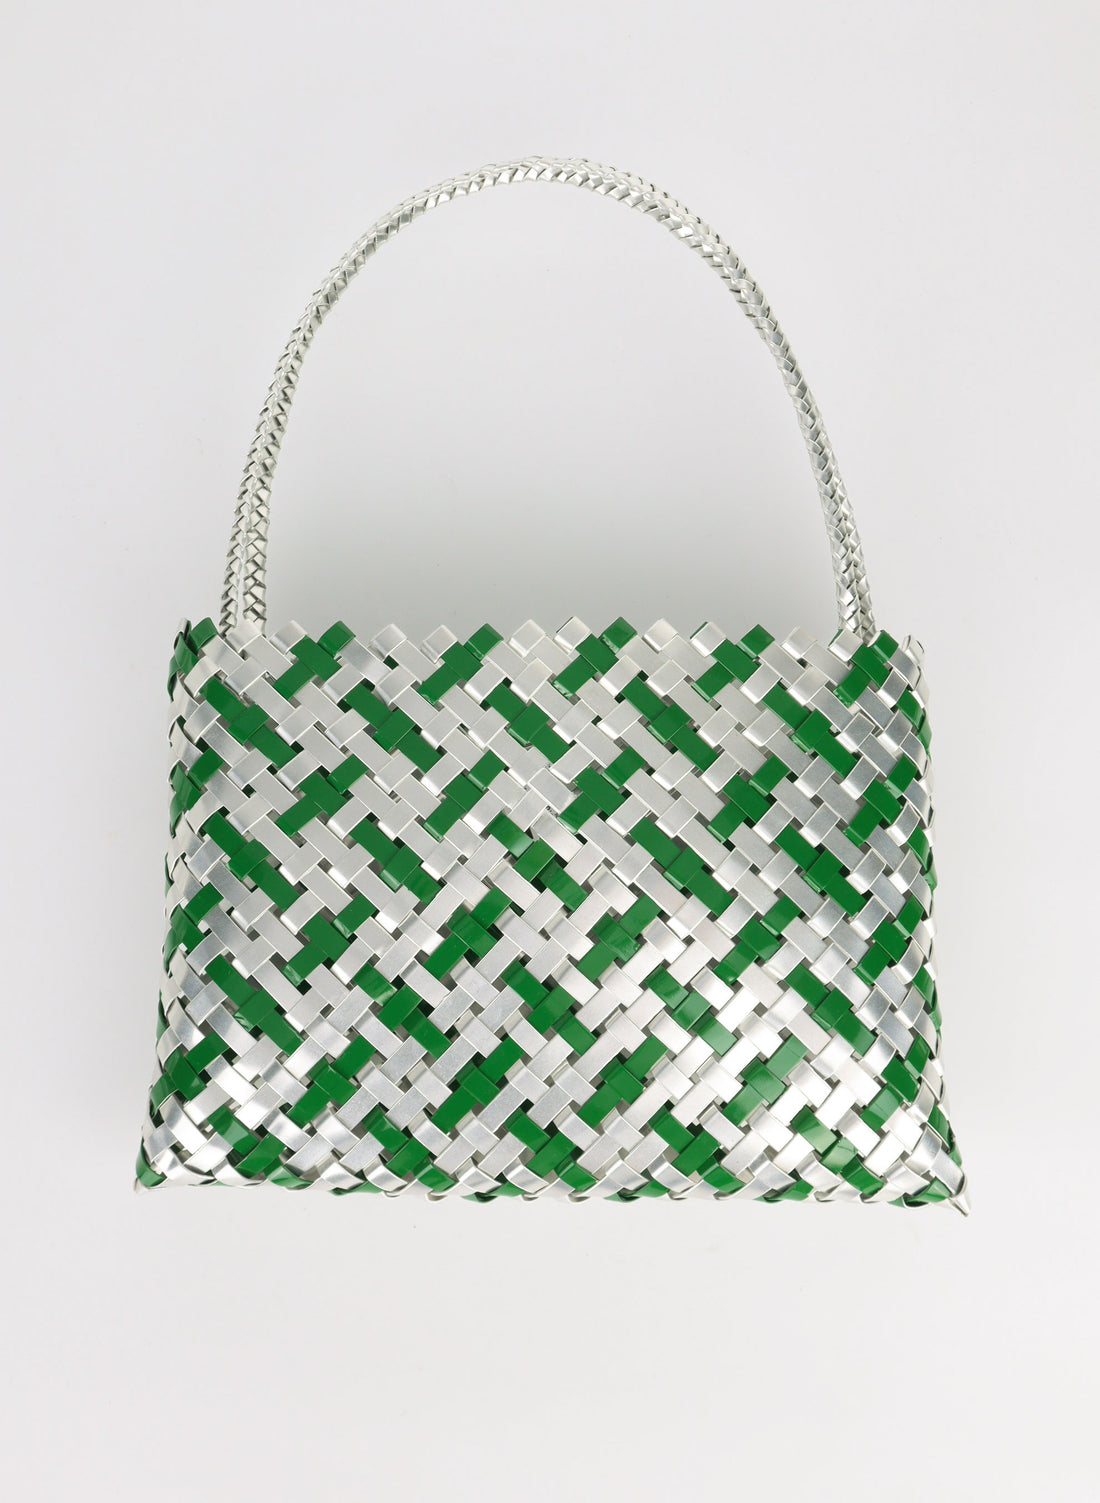 Aluminium And Green Kete (18 End)